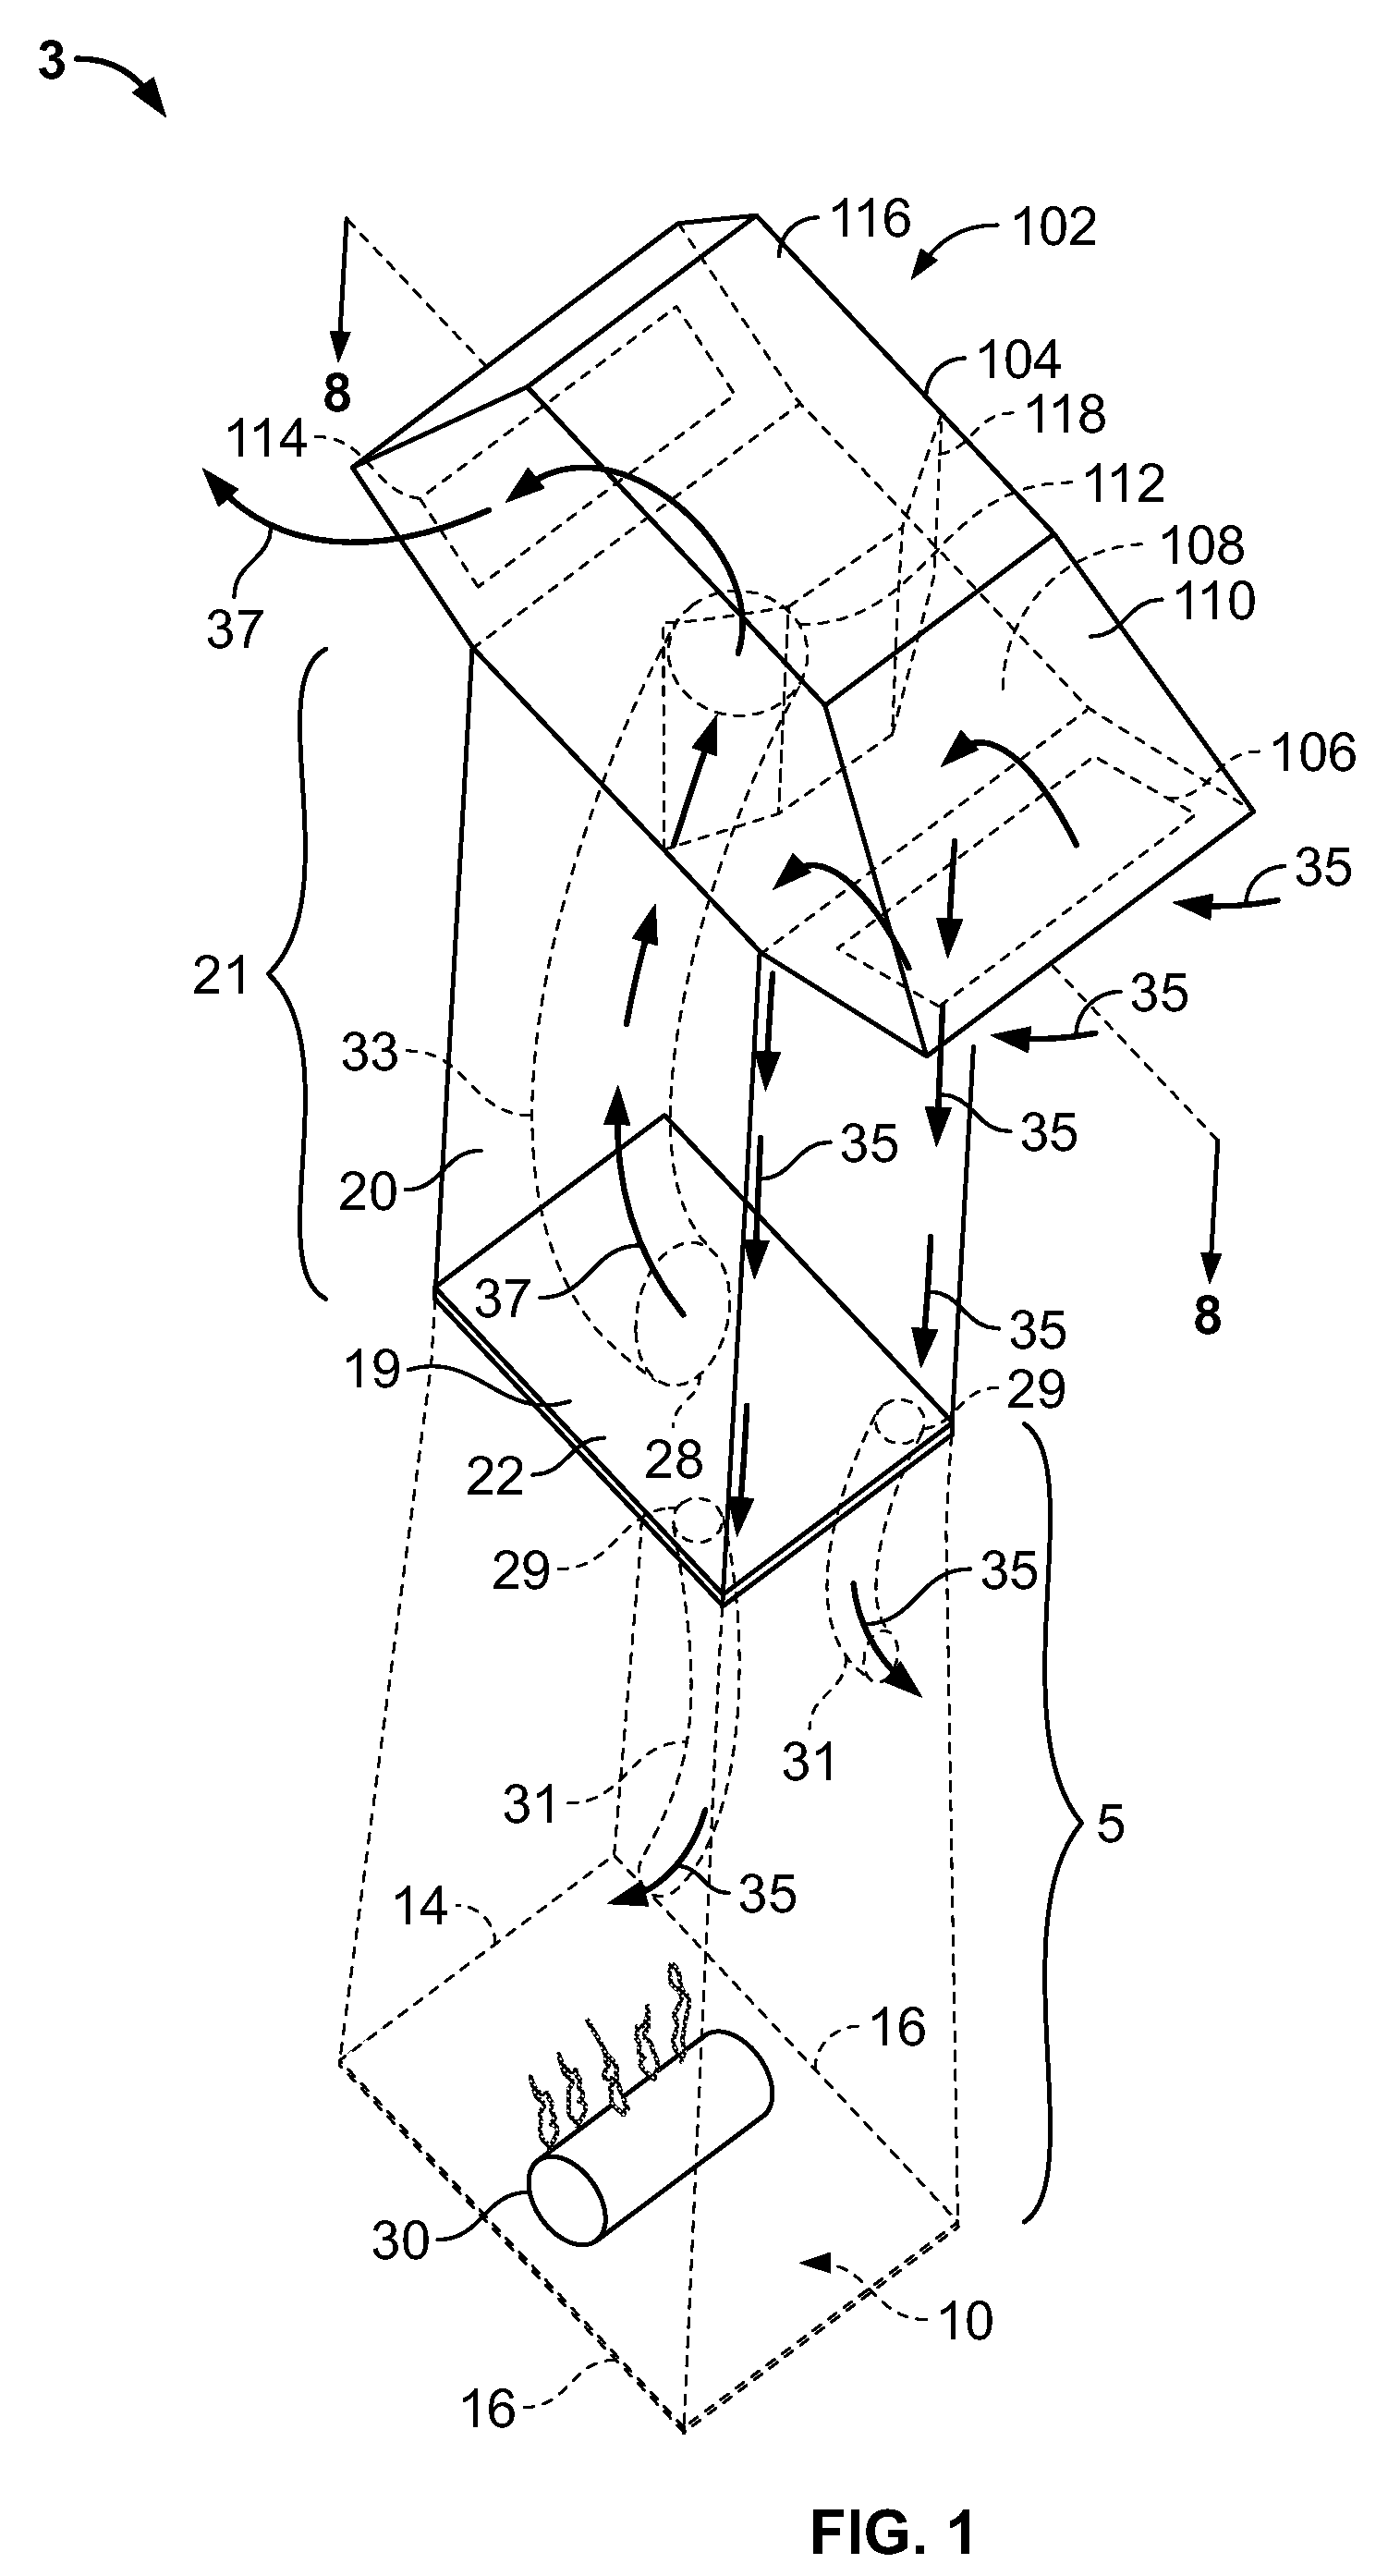 Partitioned chimney cap and fireplace venting system